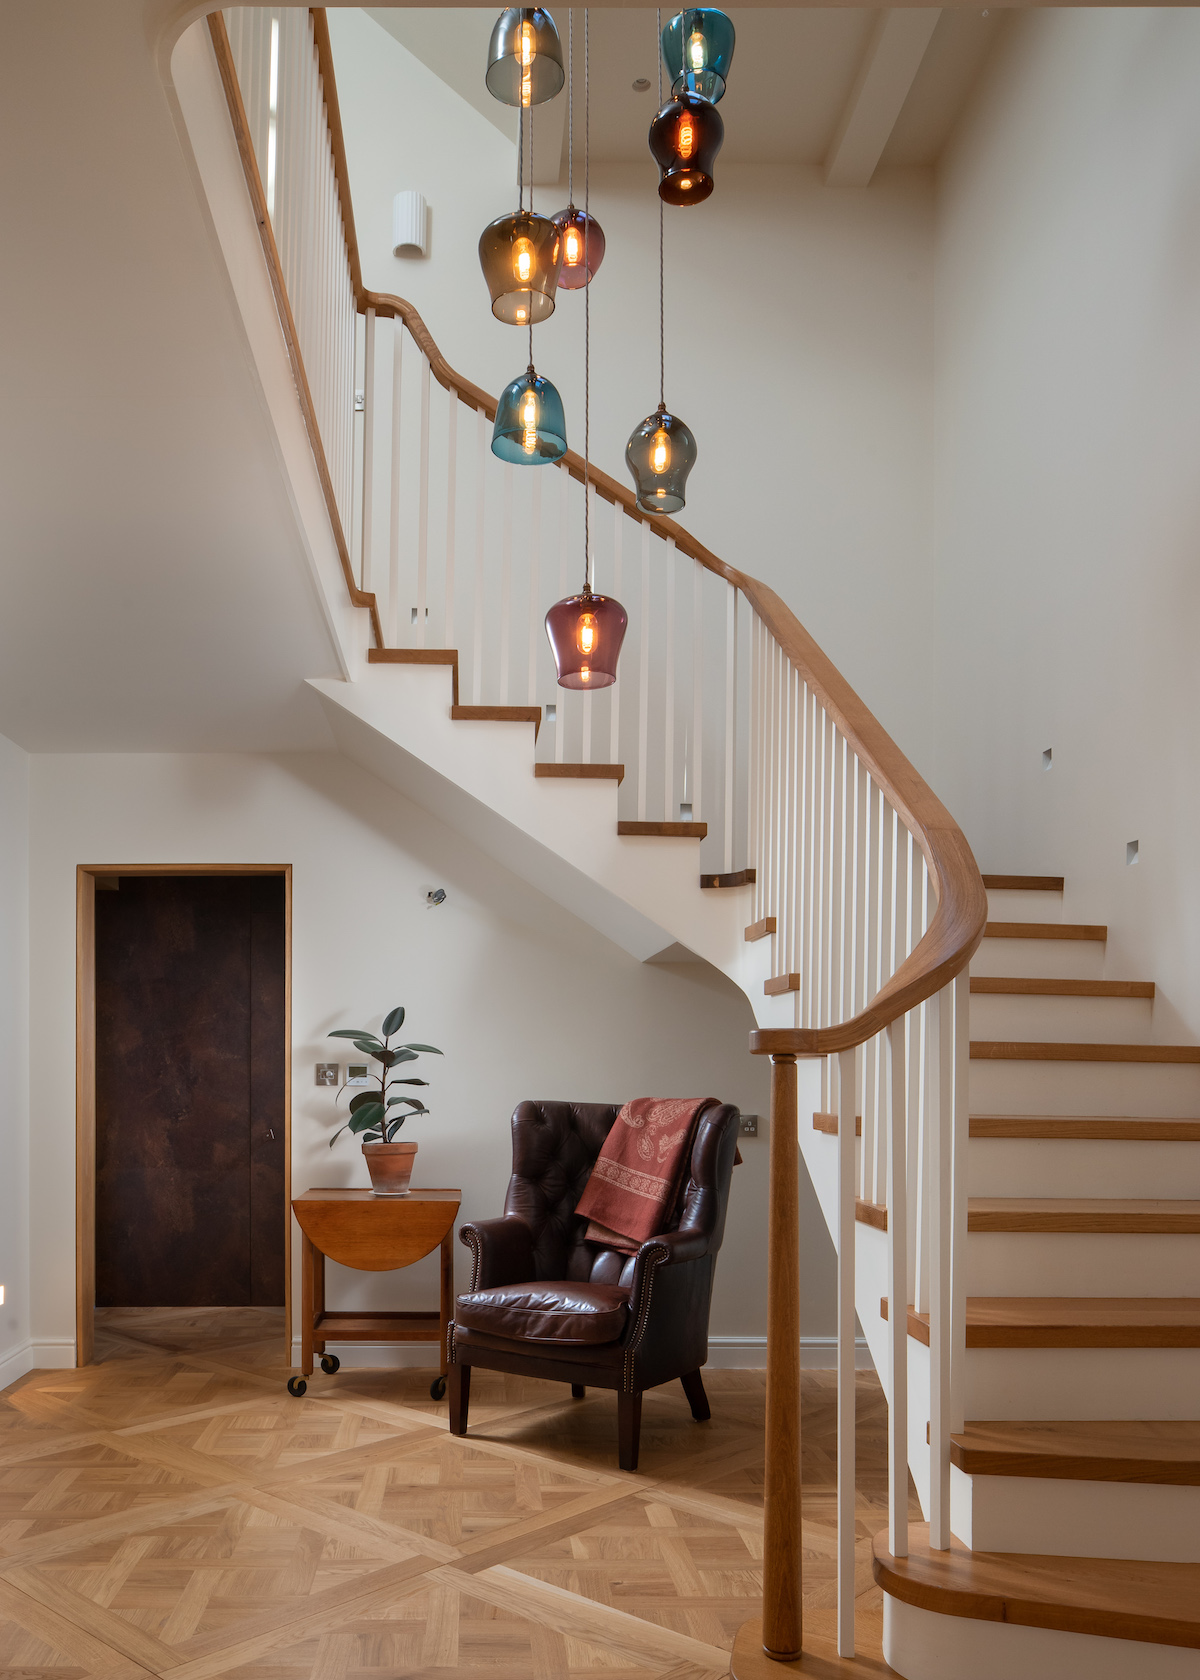 Entrance hall with a view of the stairs circling around the chandelier